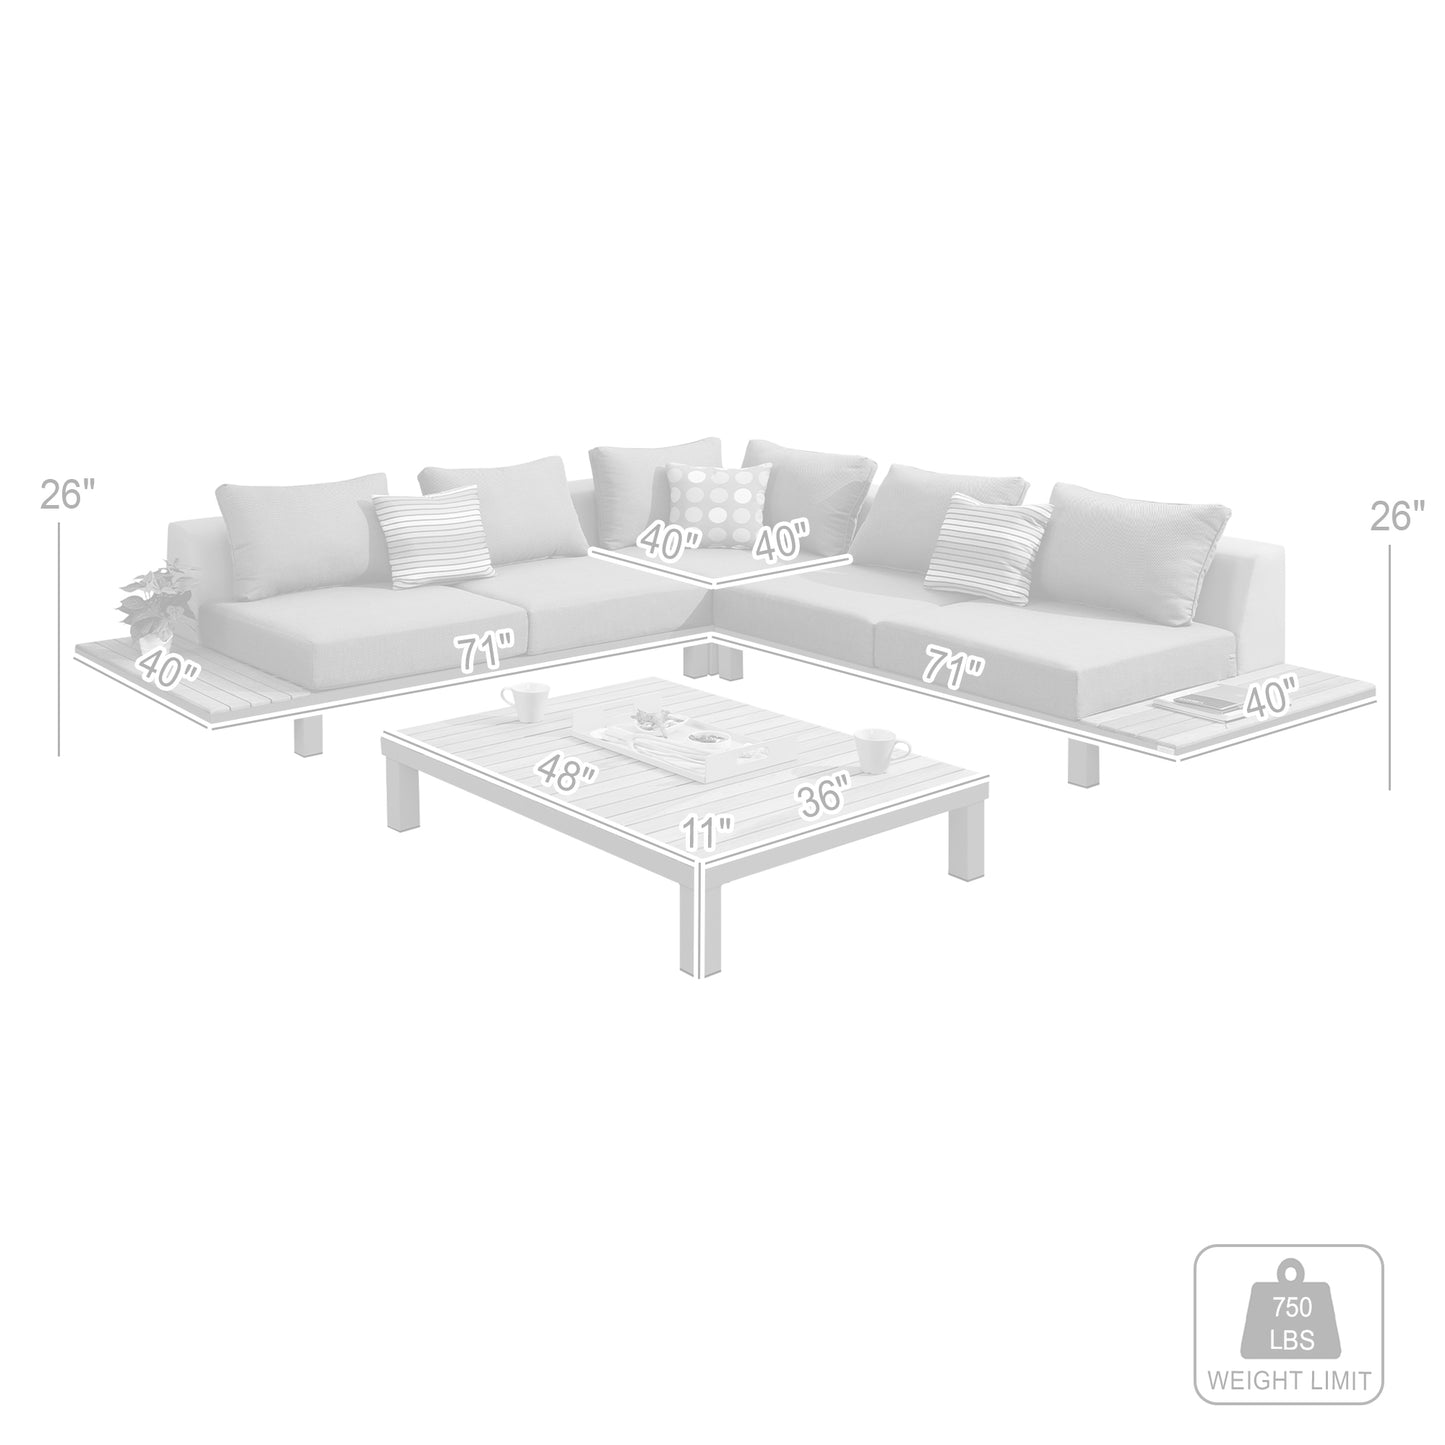 Polo 4 piece Outdoor Sectional Set with Dark Gray Cushions and Modern Accent Pillows